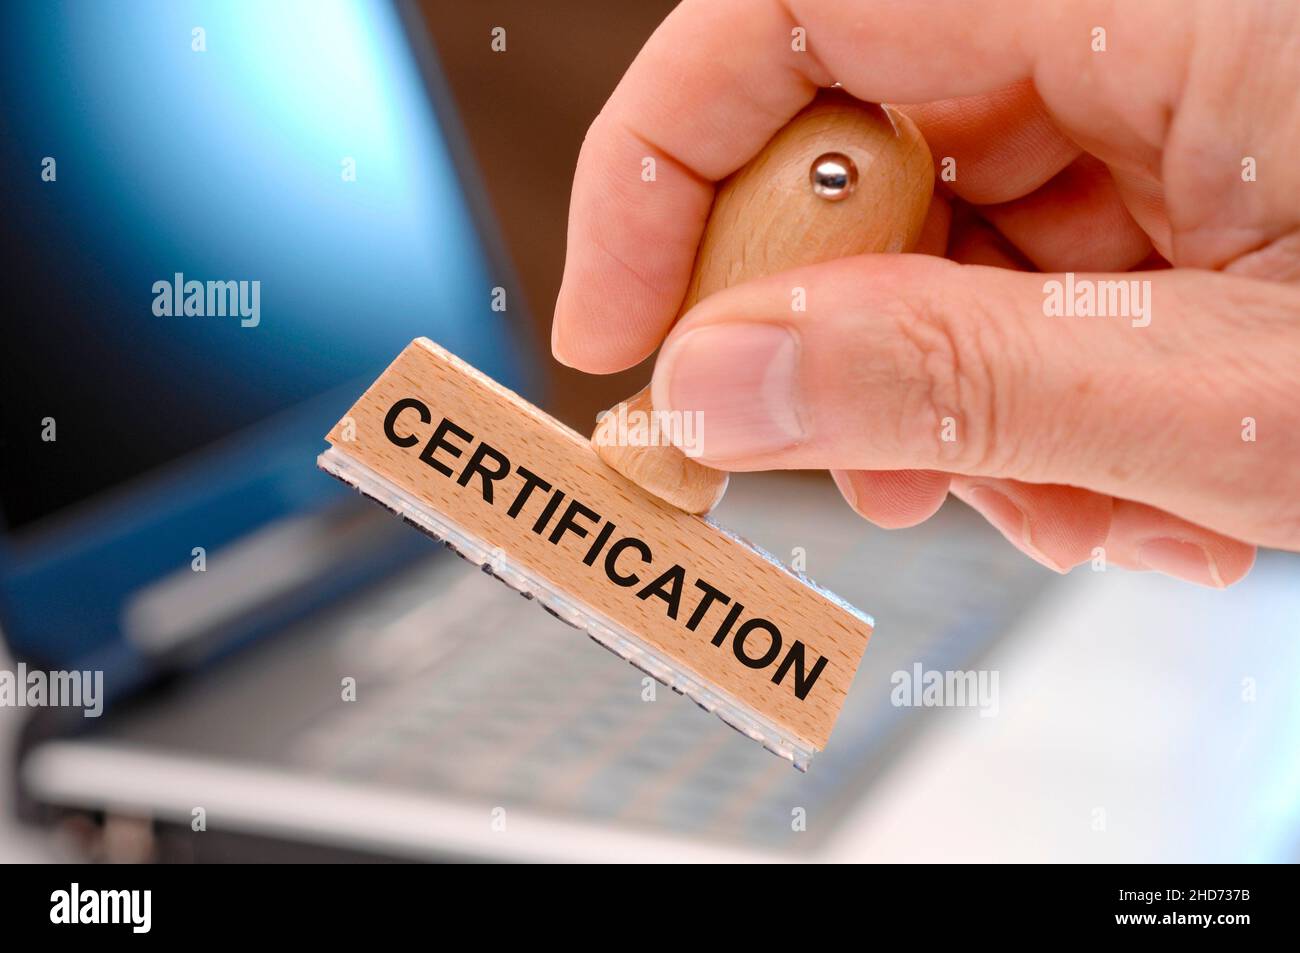 Certification printed on rubber stamp. Stock Photo